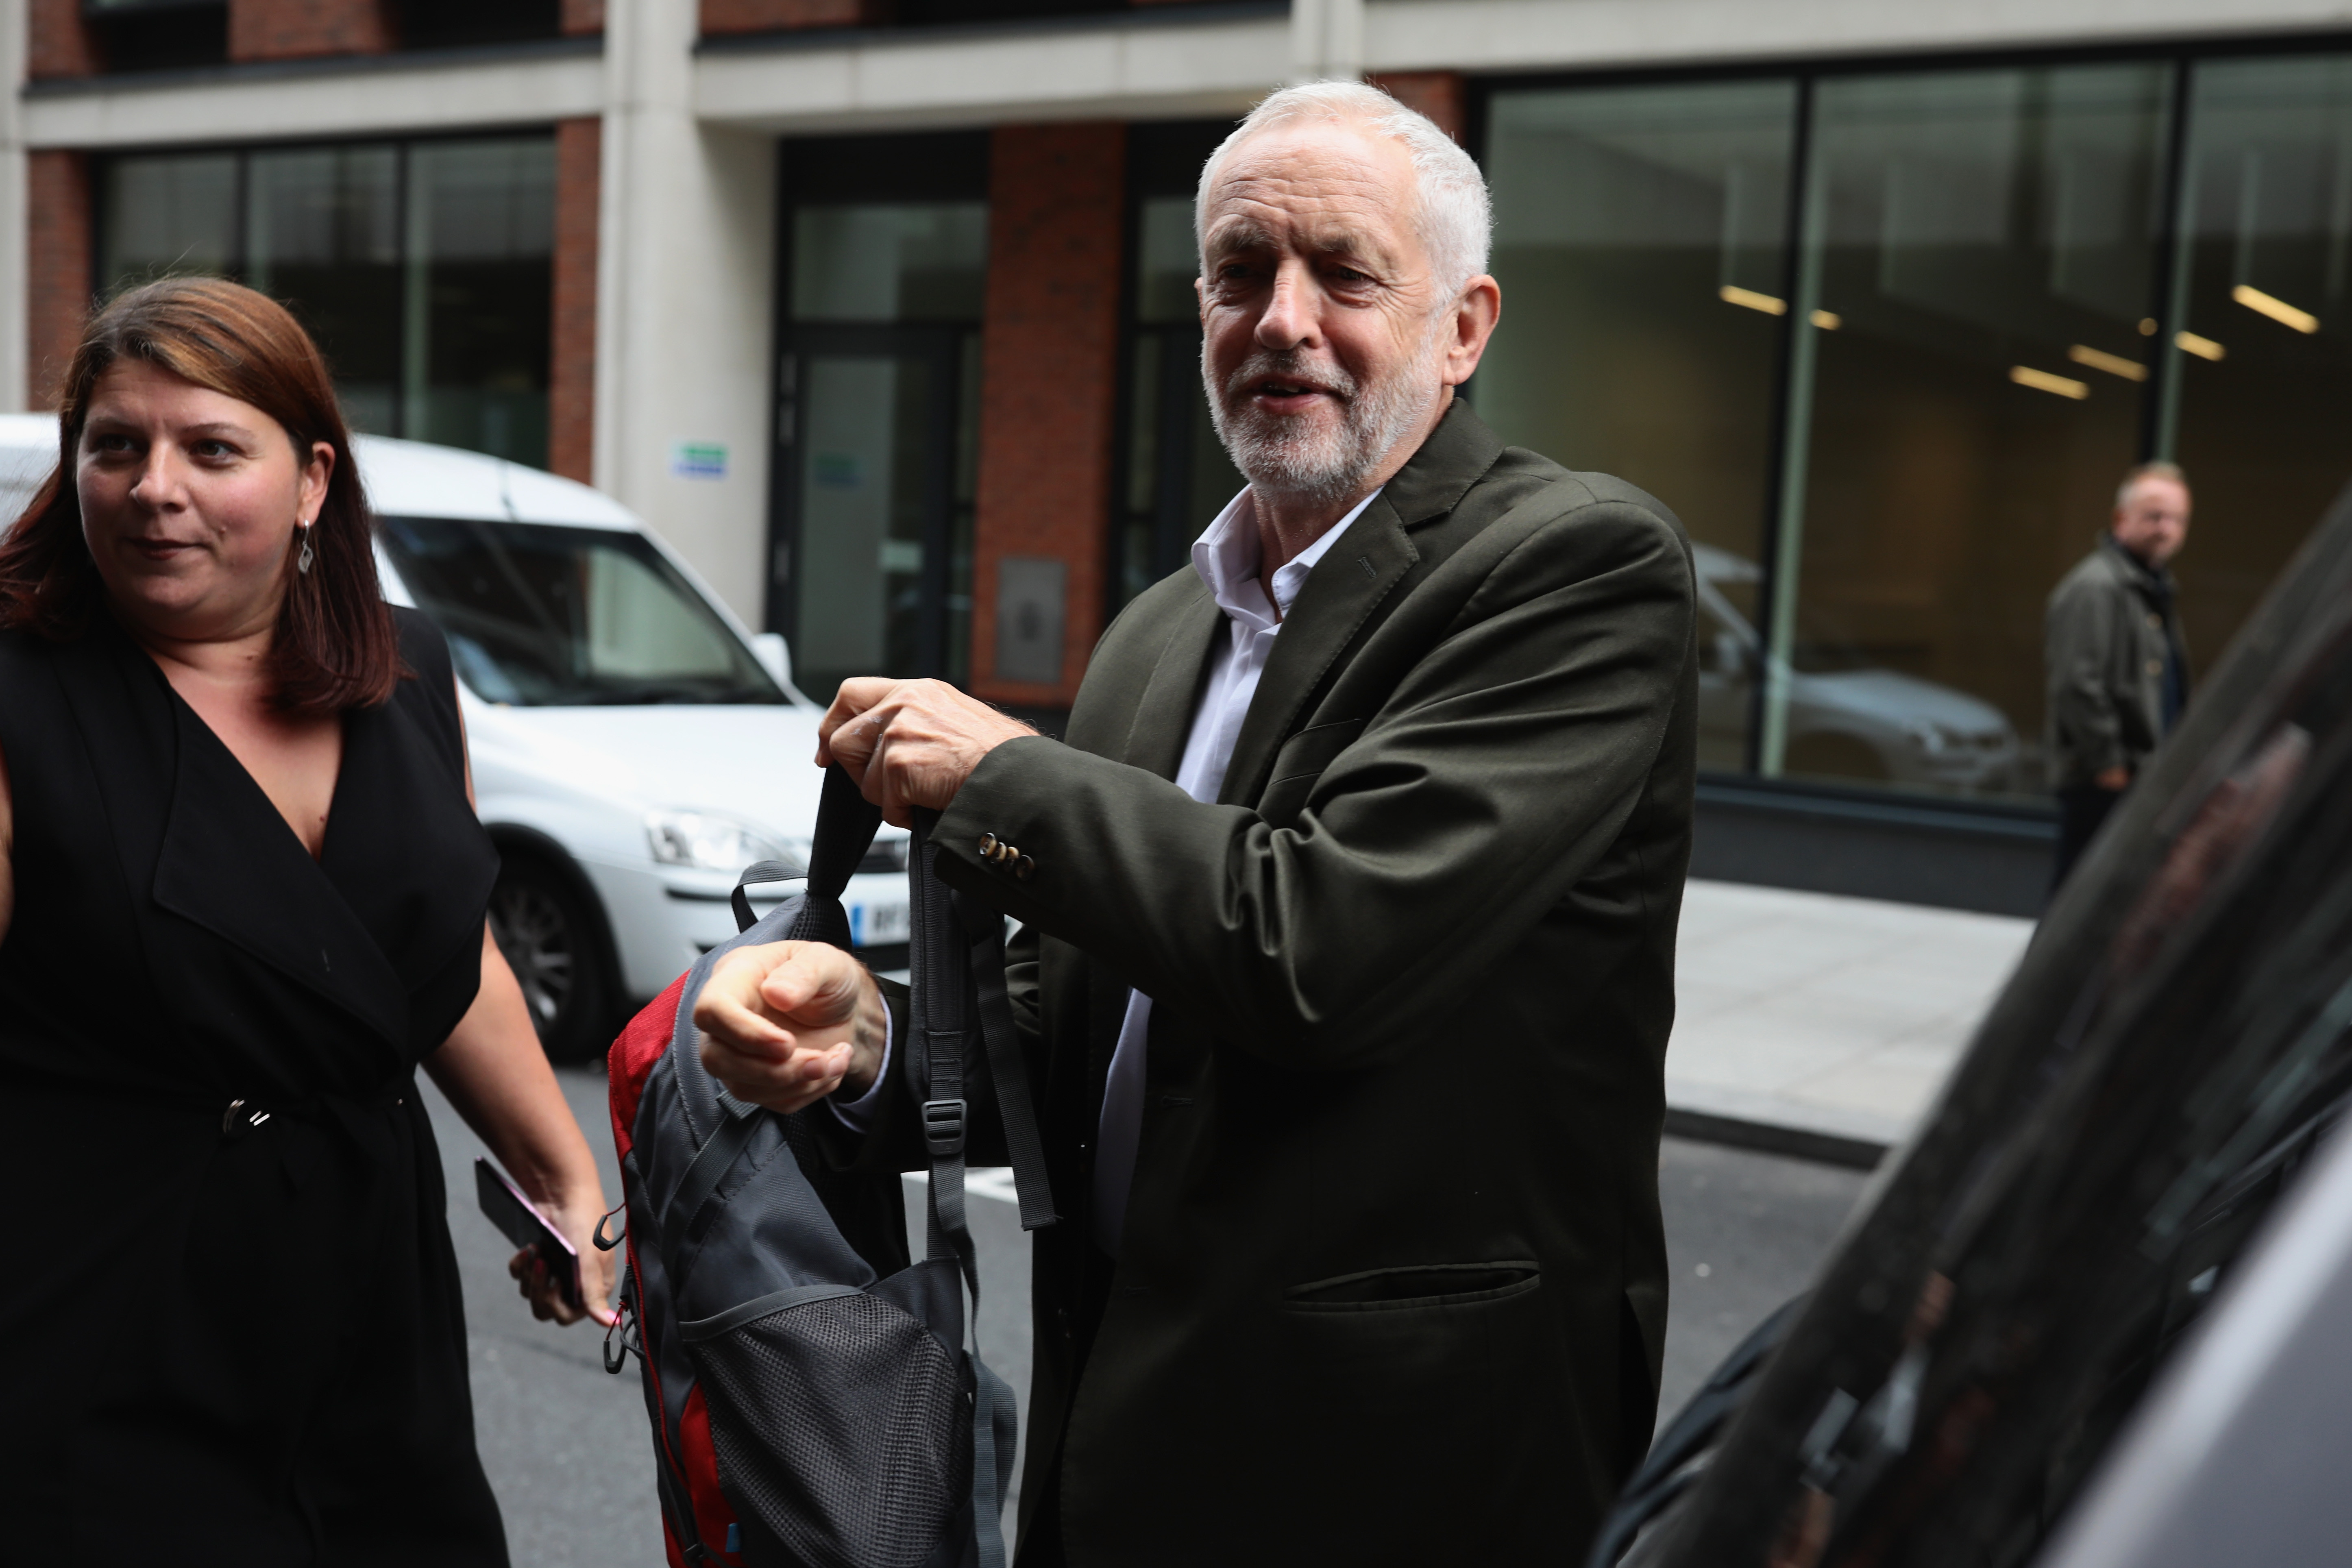 LONDON, ENGLAND - SEPTEMBER 04: Labour Leader Jeremy Corbyn arrives at a meeting of the National Executive of Britains Labour Party on September 4, 2018 in London, England. Labour's National Executive committee will today decide on the party's new antisemitism definition. (Photo by Dan Kitwood/Getty Images)